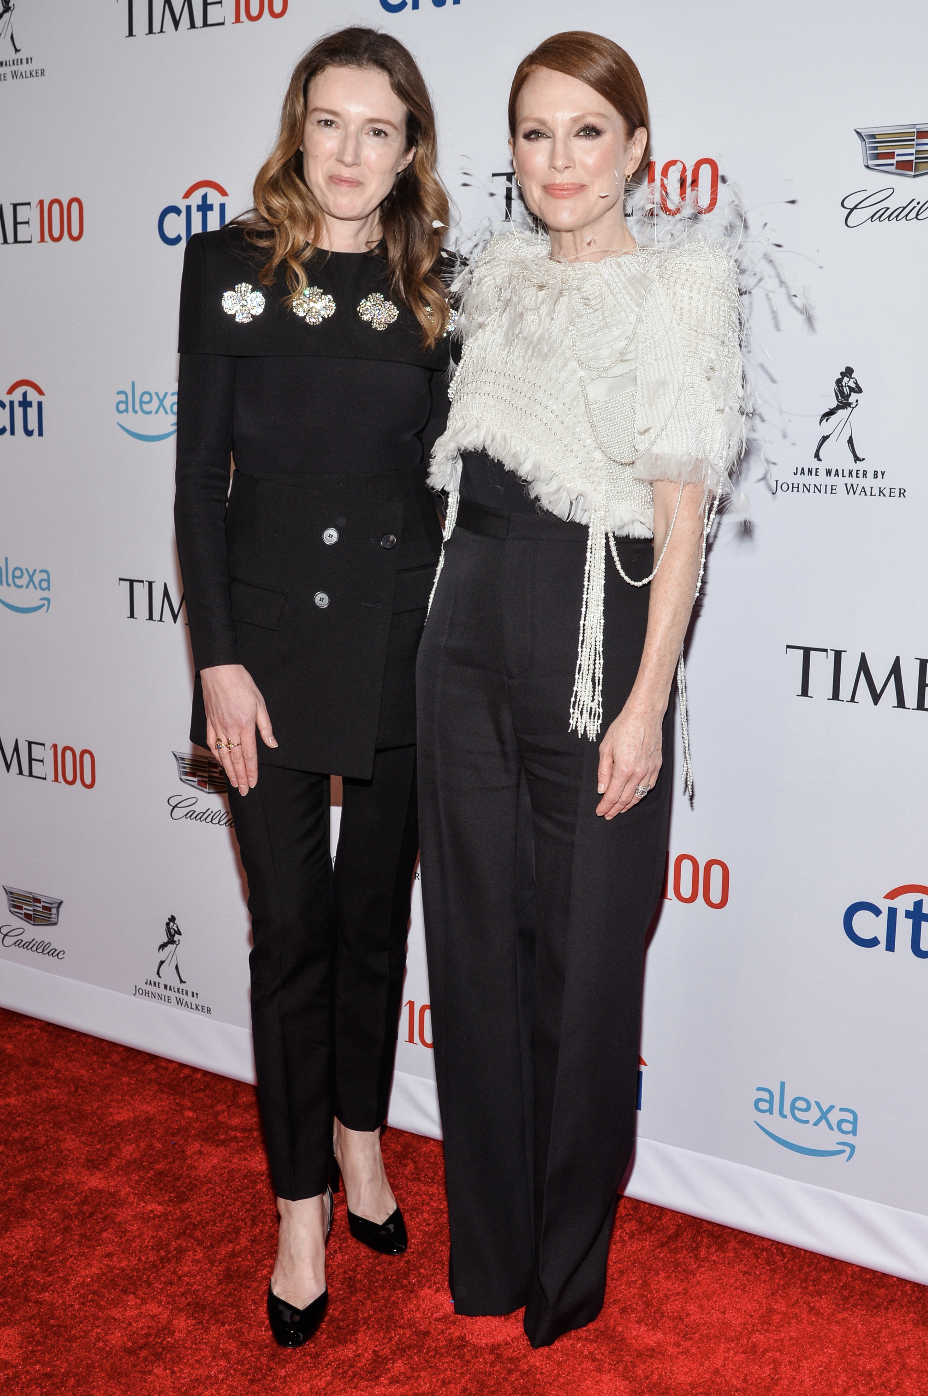 Julianne Moore and Clare Waight Keller at the Time 100 Gala